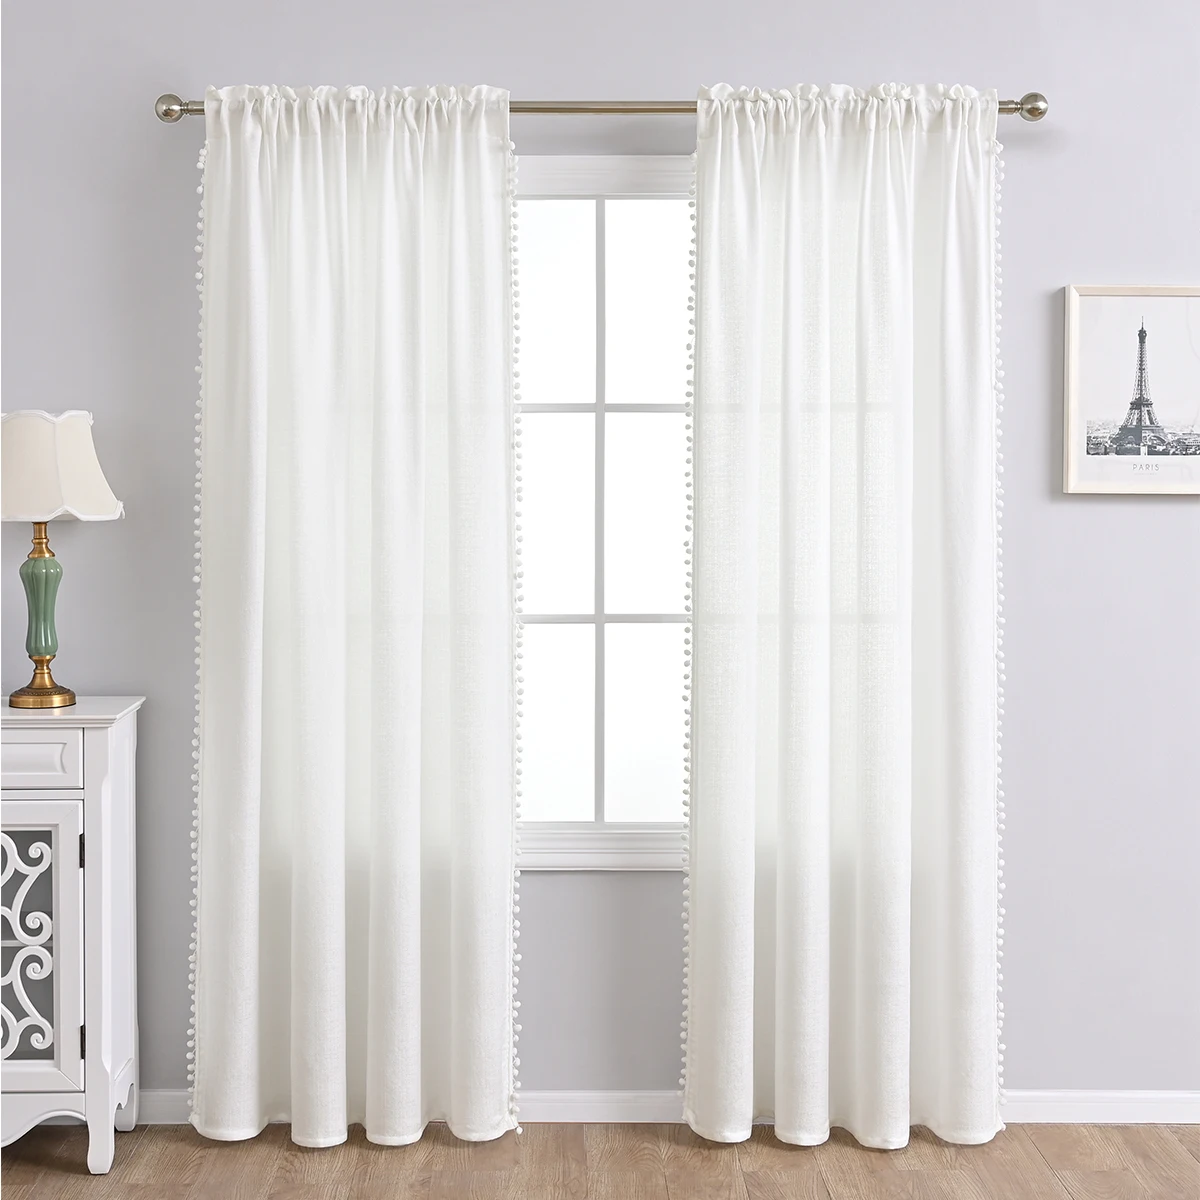 

2022 Fashion White Semi Sheer Screening Gauze Tulle Drapes Living Room Curtains Bedroom Blinds for Window Screening Tulle Drapes